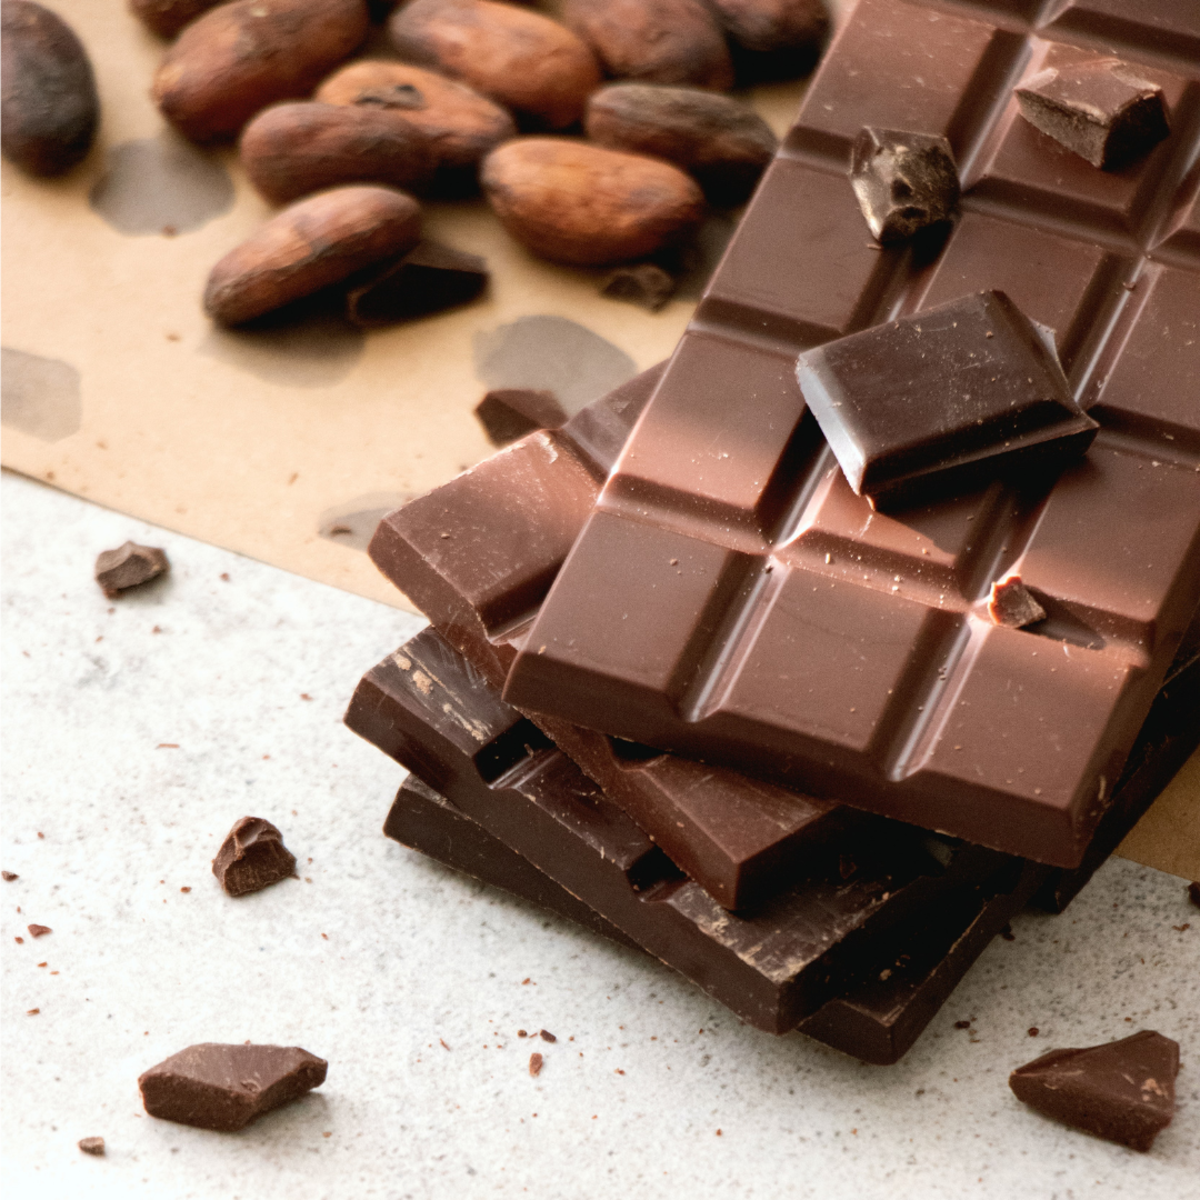 Which Chocolate Melts the Fastest and Why? Dark, Milk or White Chocolate?